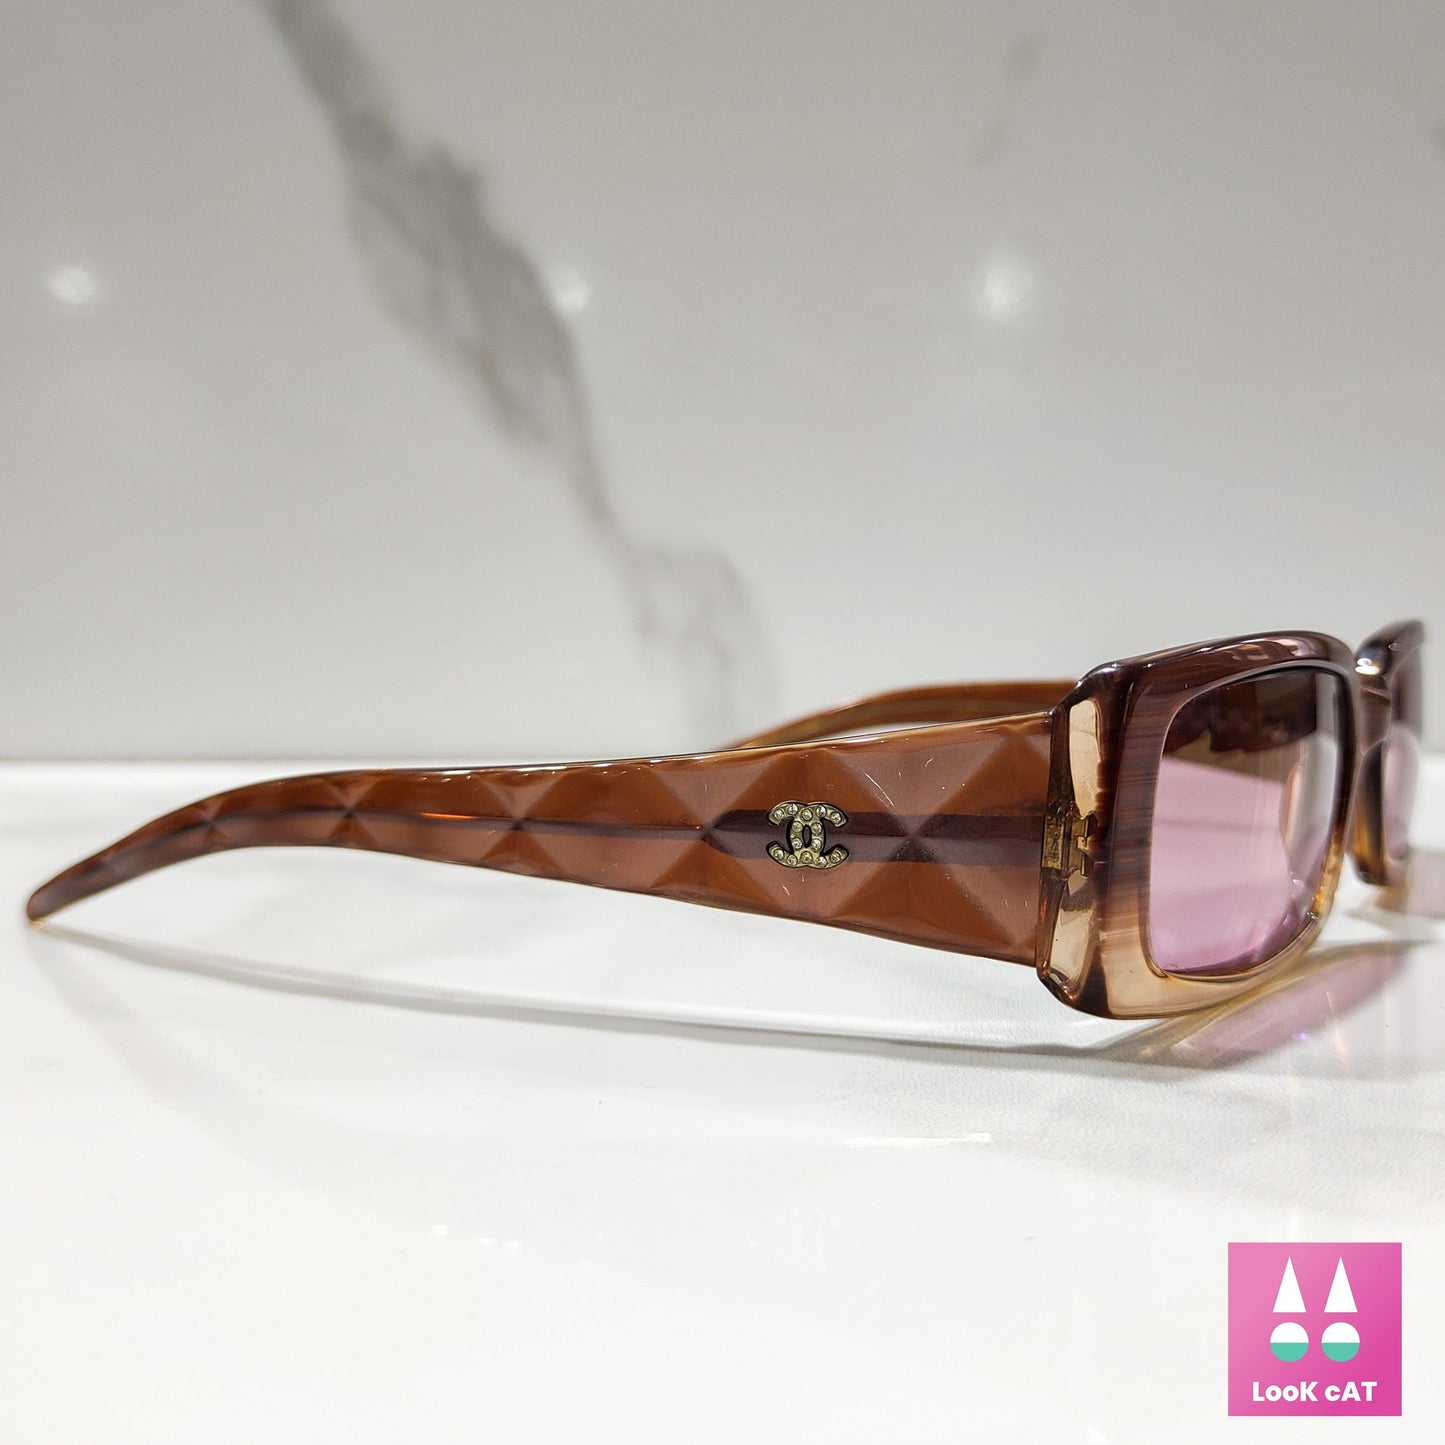 Chanel sunglasses model 5046 Pink lunette brille y2k shades rimless